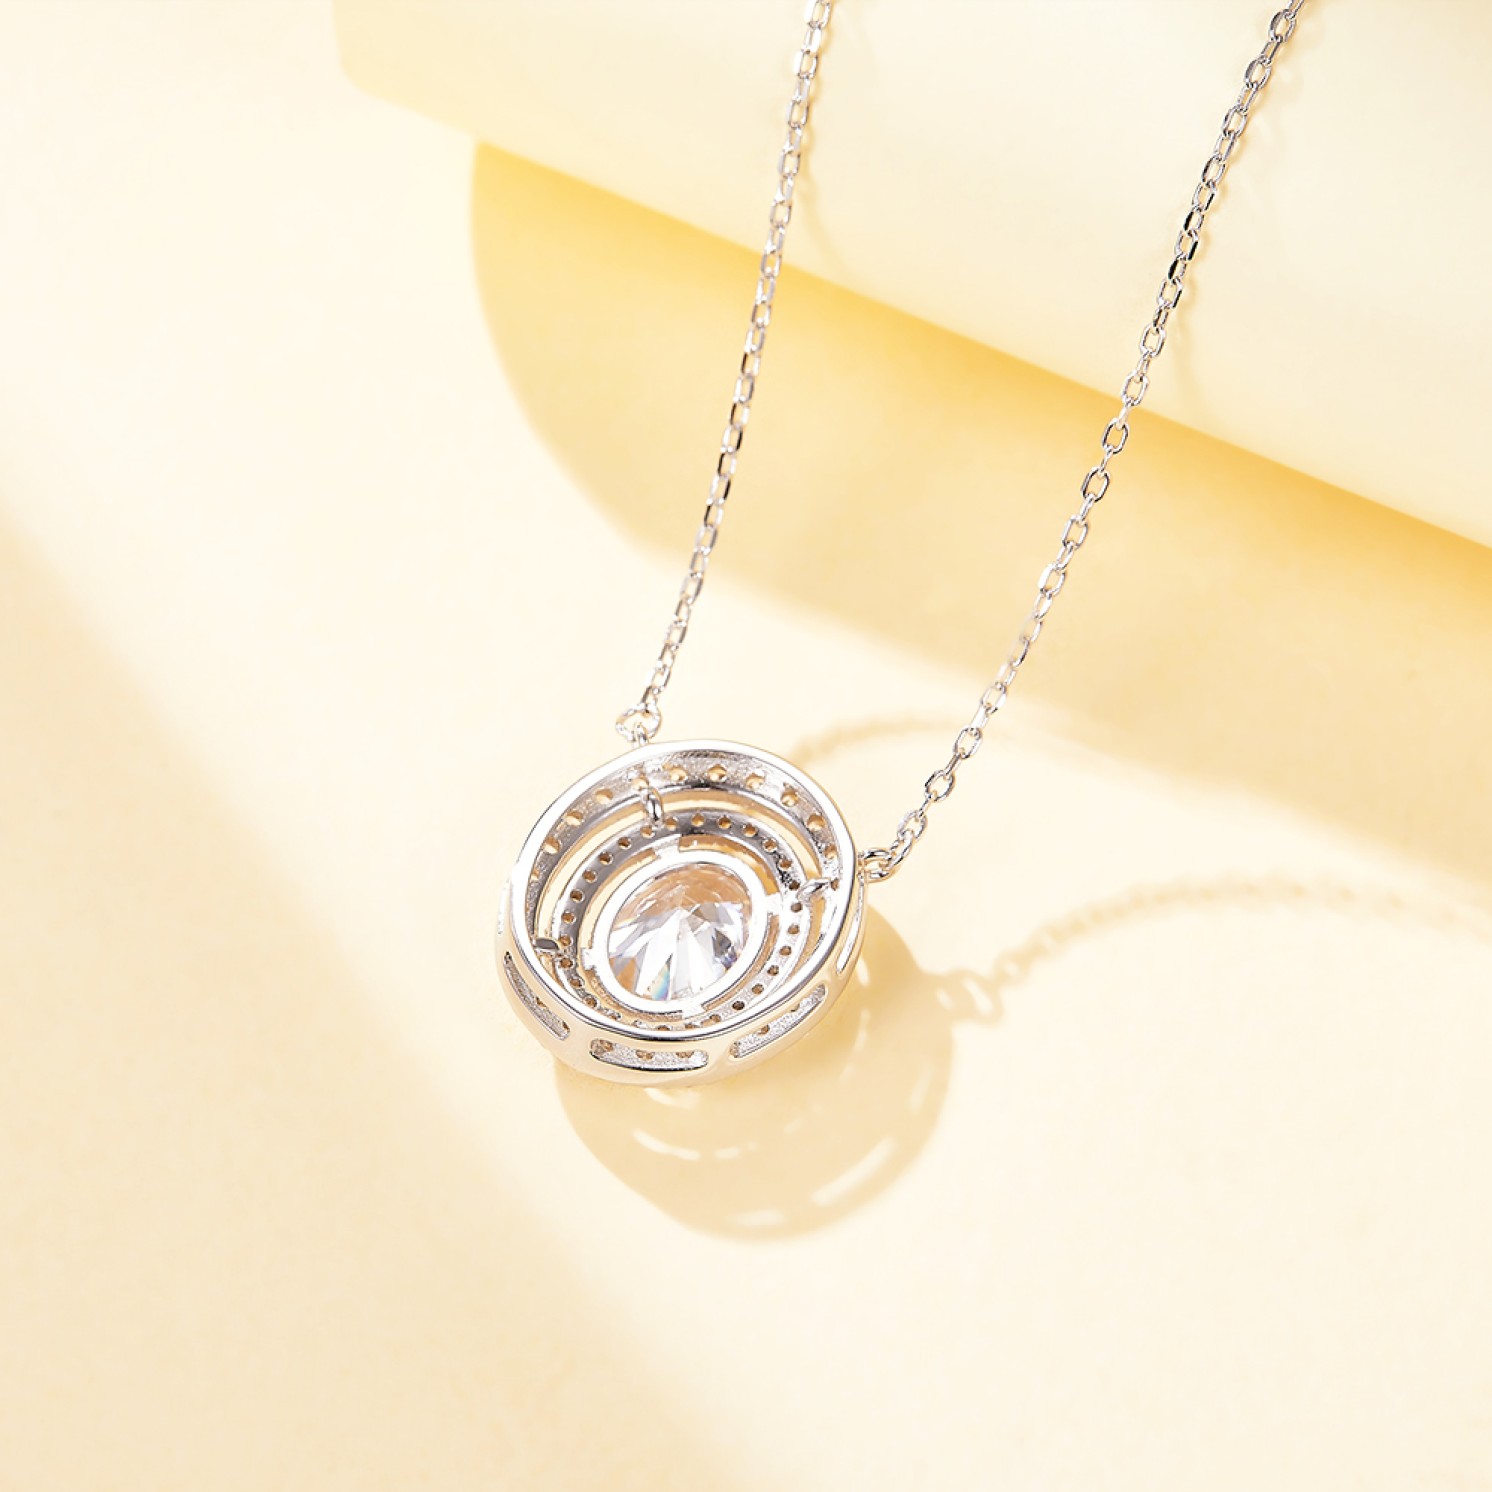 Galaxia - Oval Cut Moissanite Pendant with Encircled Double Halo